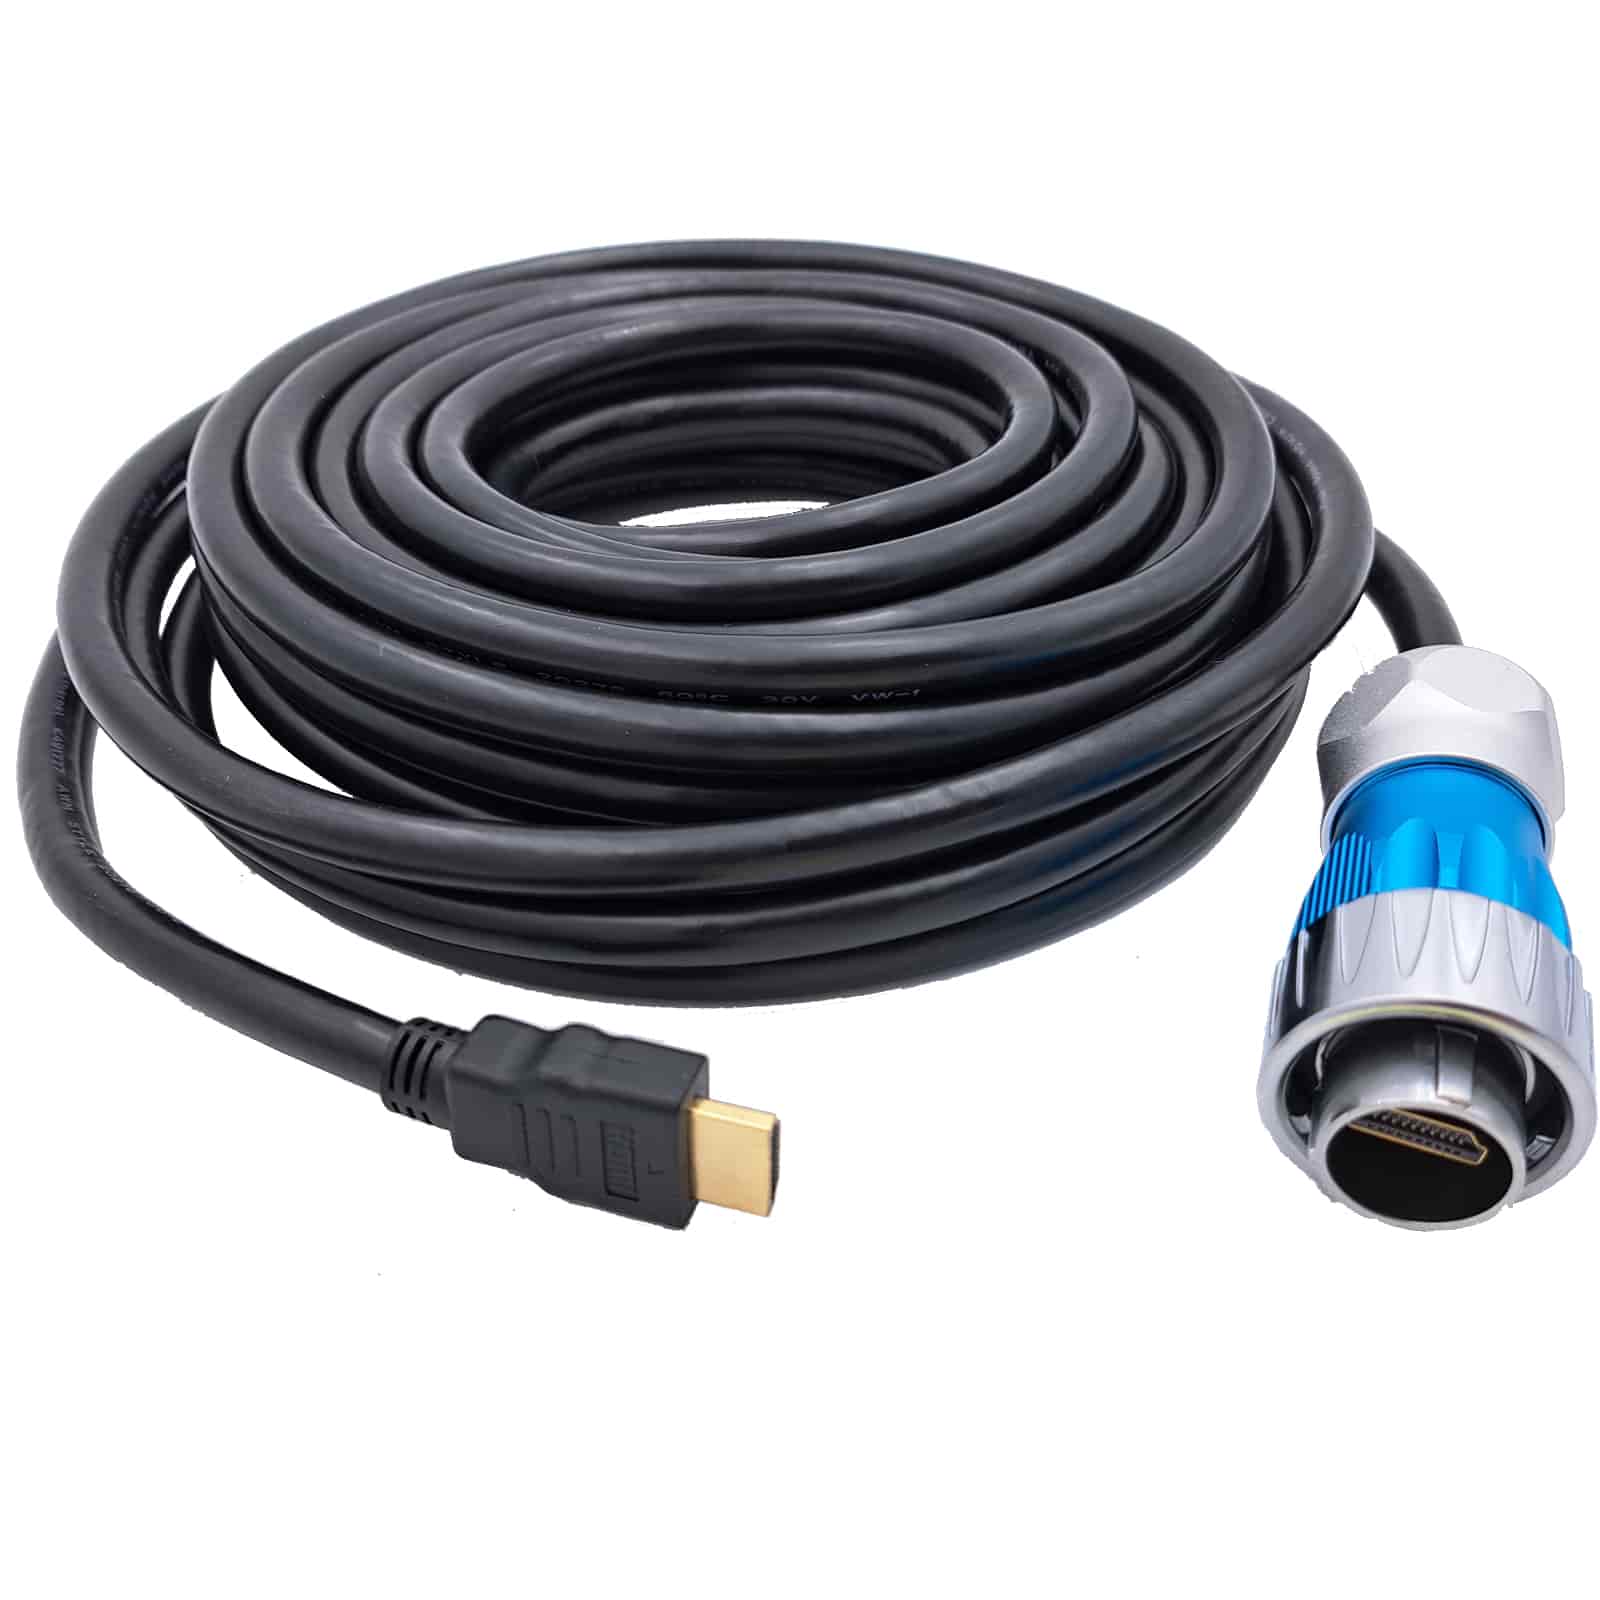 DH-24 Cable Connector HDMI m | ENOVA Solutions AG Connectors & Cables English